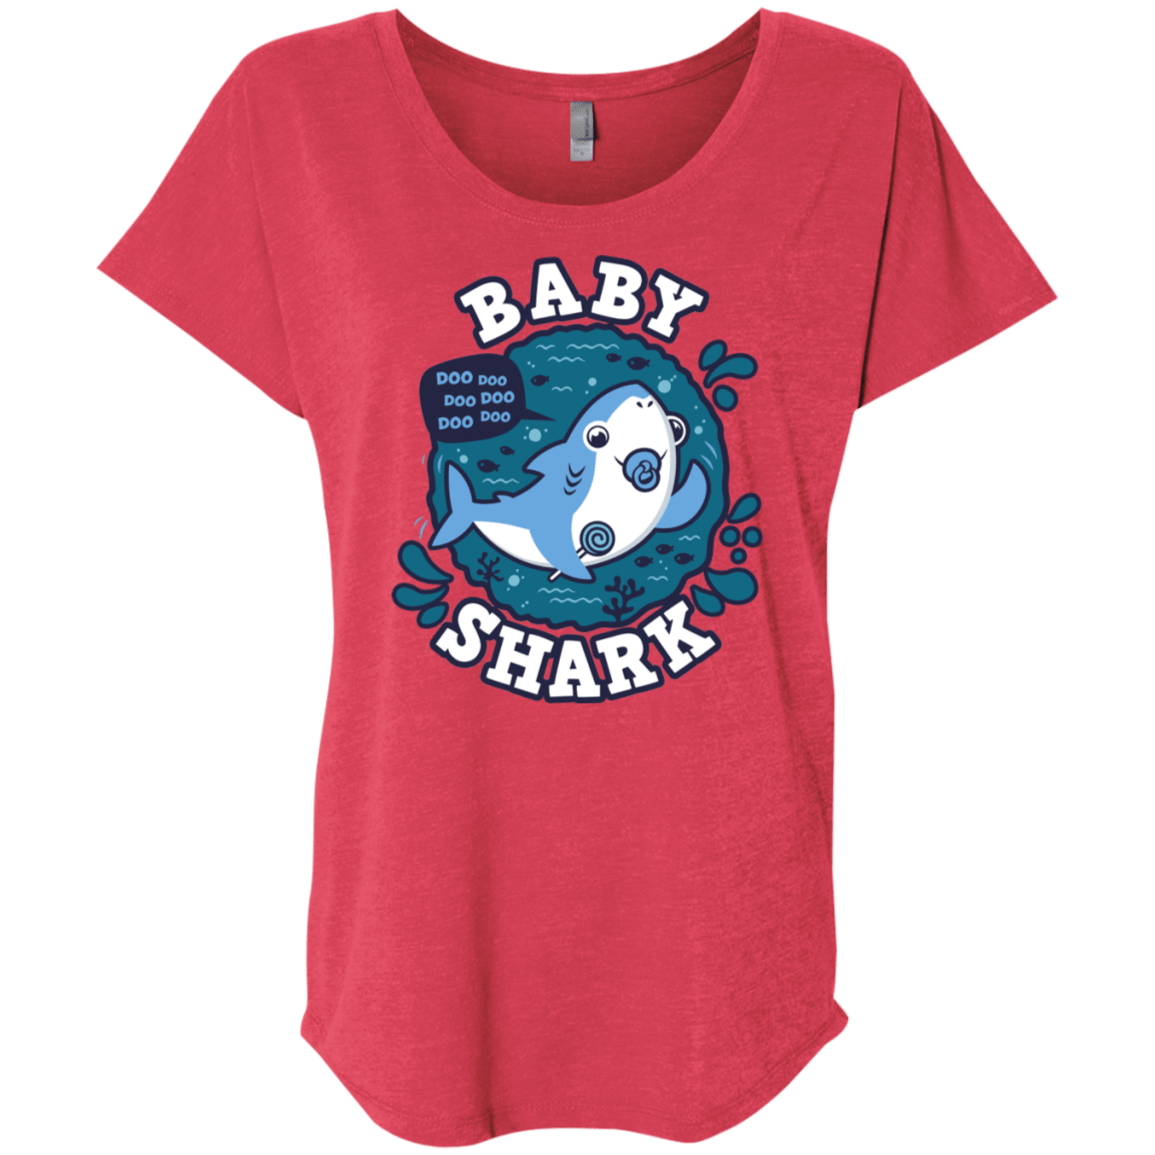 T-Shirts Vintage Red / X-Small Shark Family trazo - Baby Boy chupete Triblend Dolman Sleeve